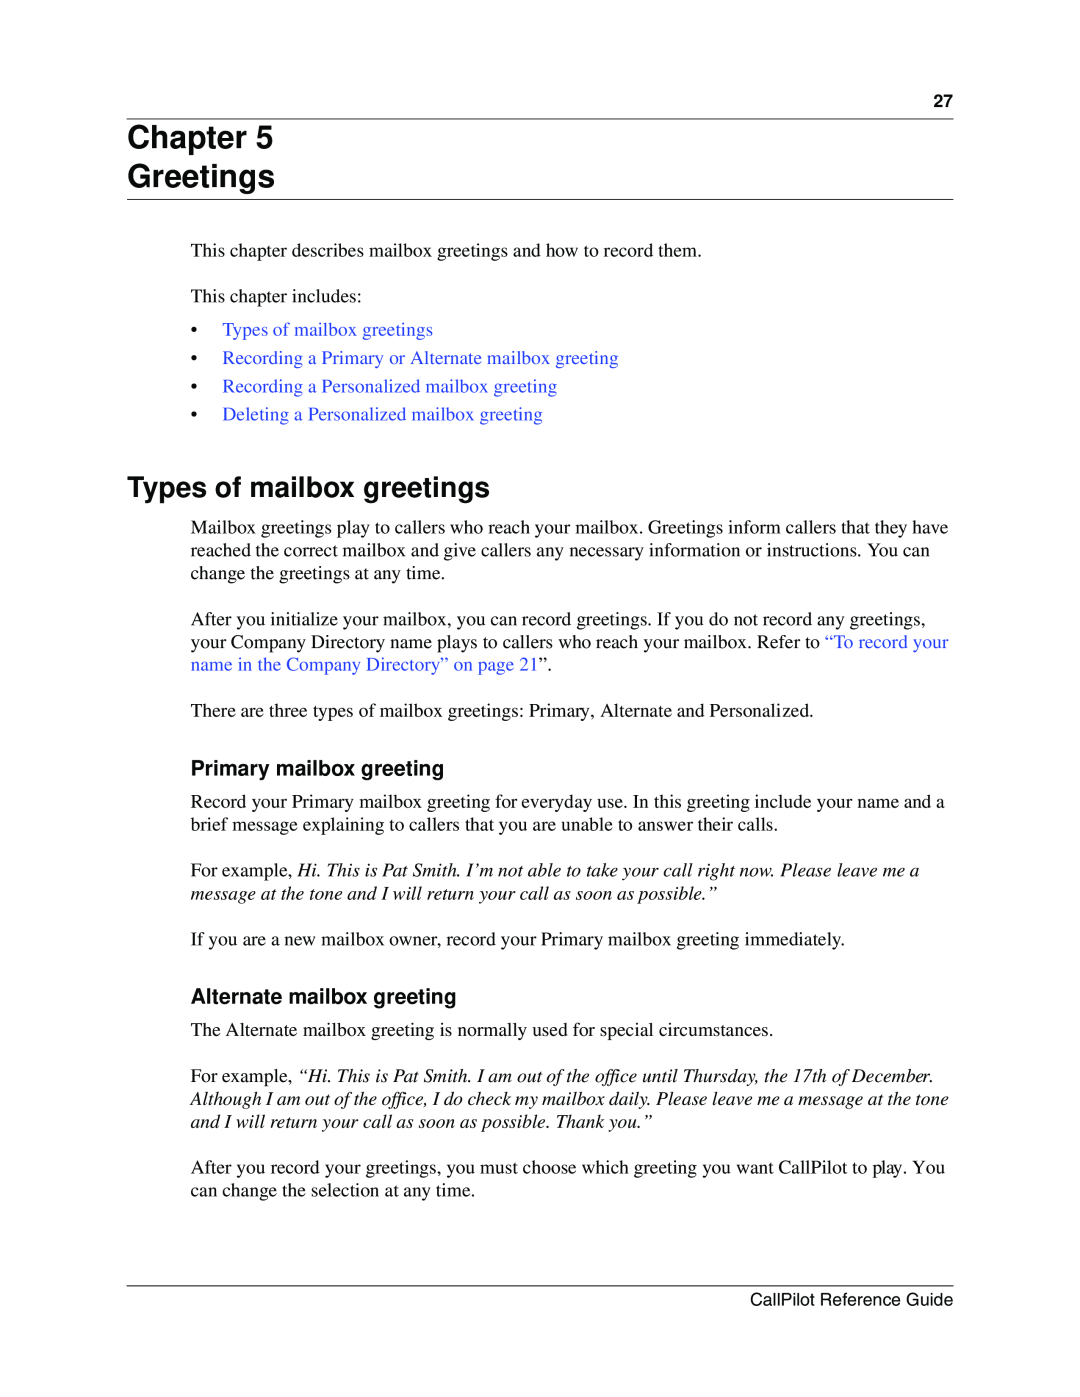 Nortel Networks CallPilot manual Chapter Greetings, Types of mailbox greetings, Primary mailbox greeting 